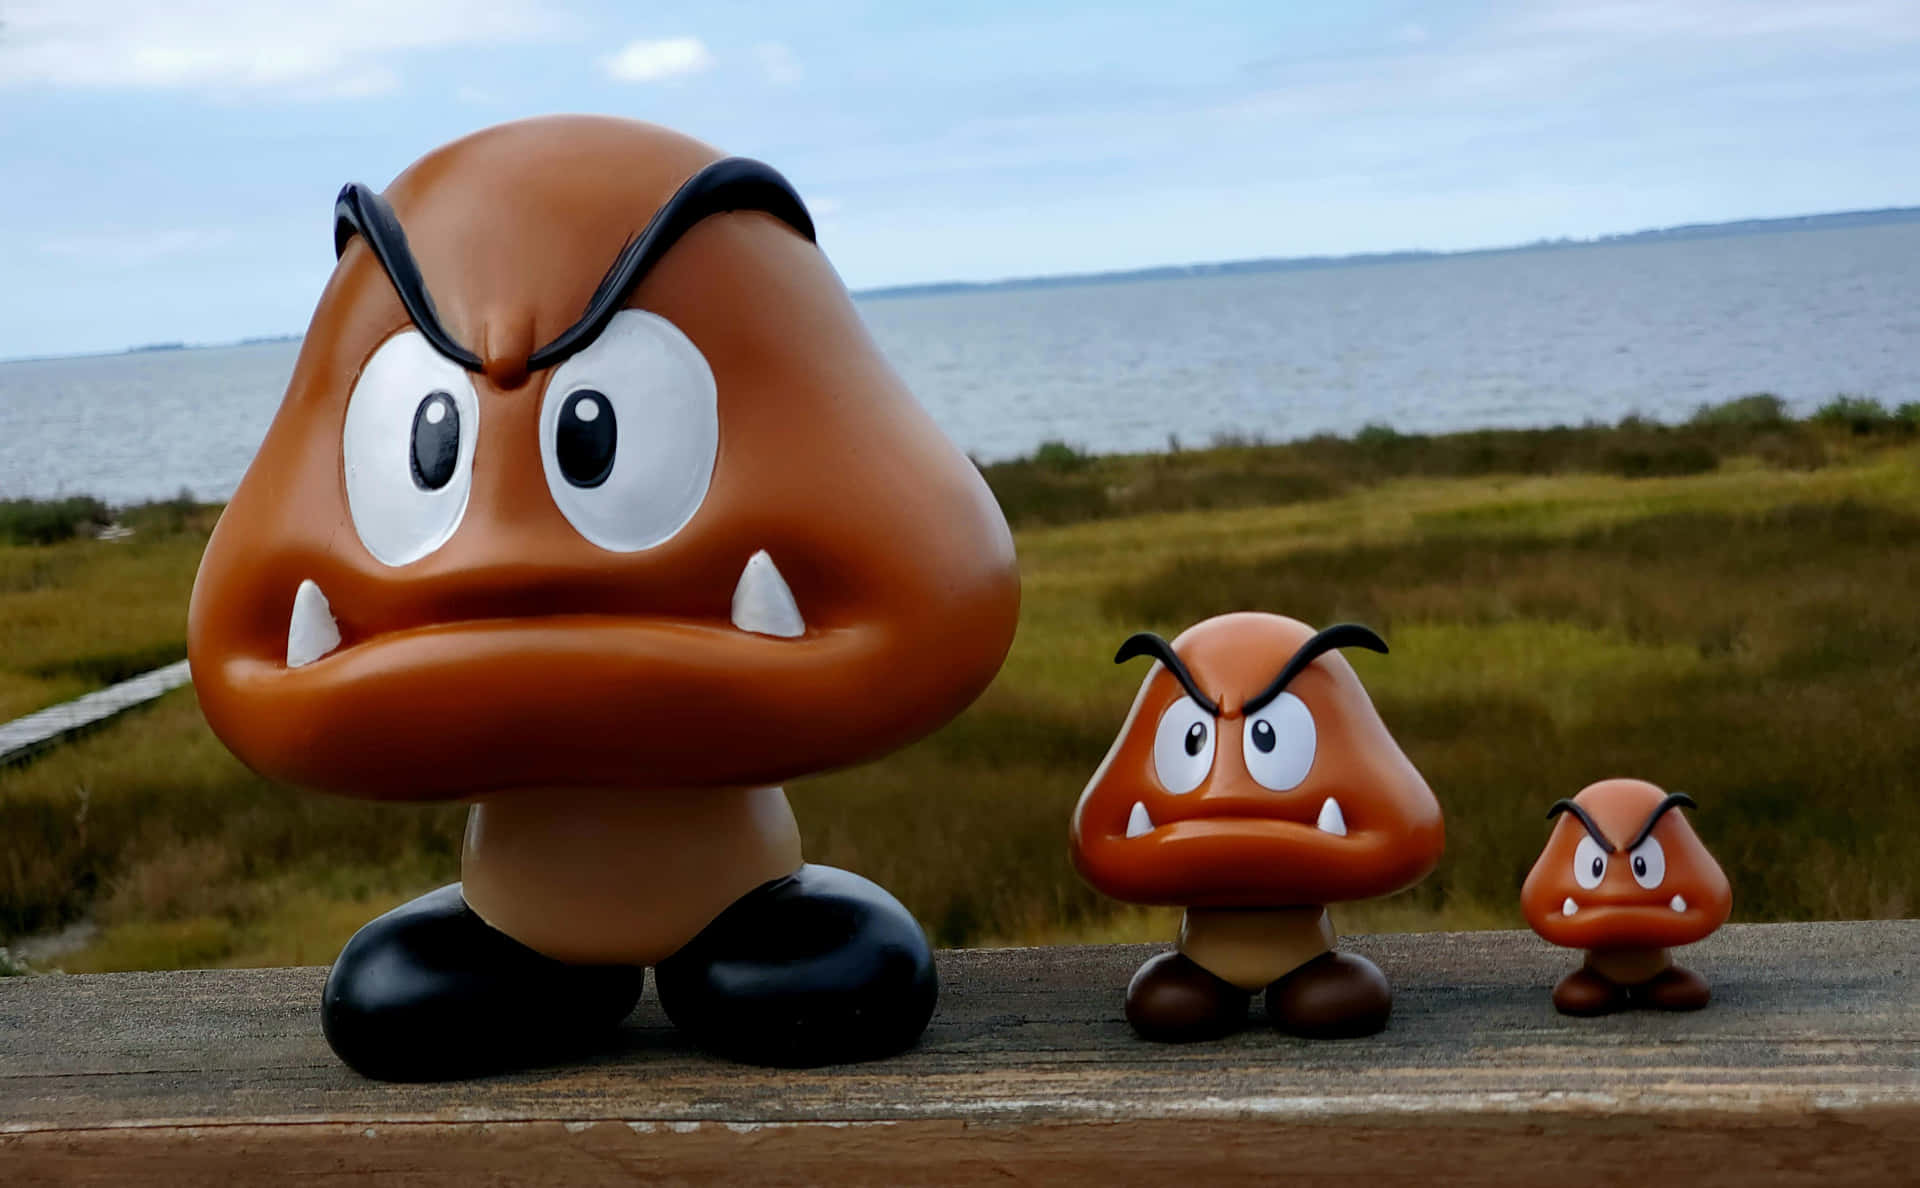 Goomba character posing in an action-packed scene Wallpaper